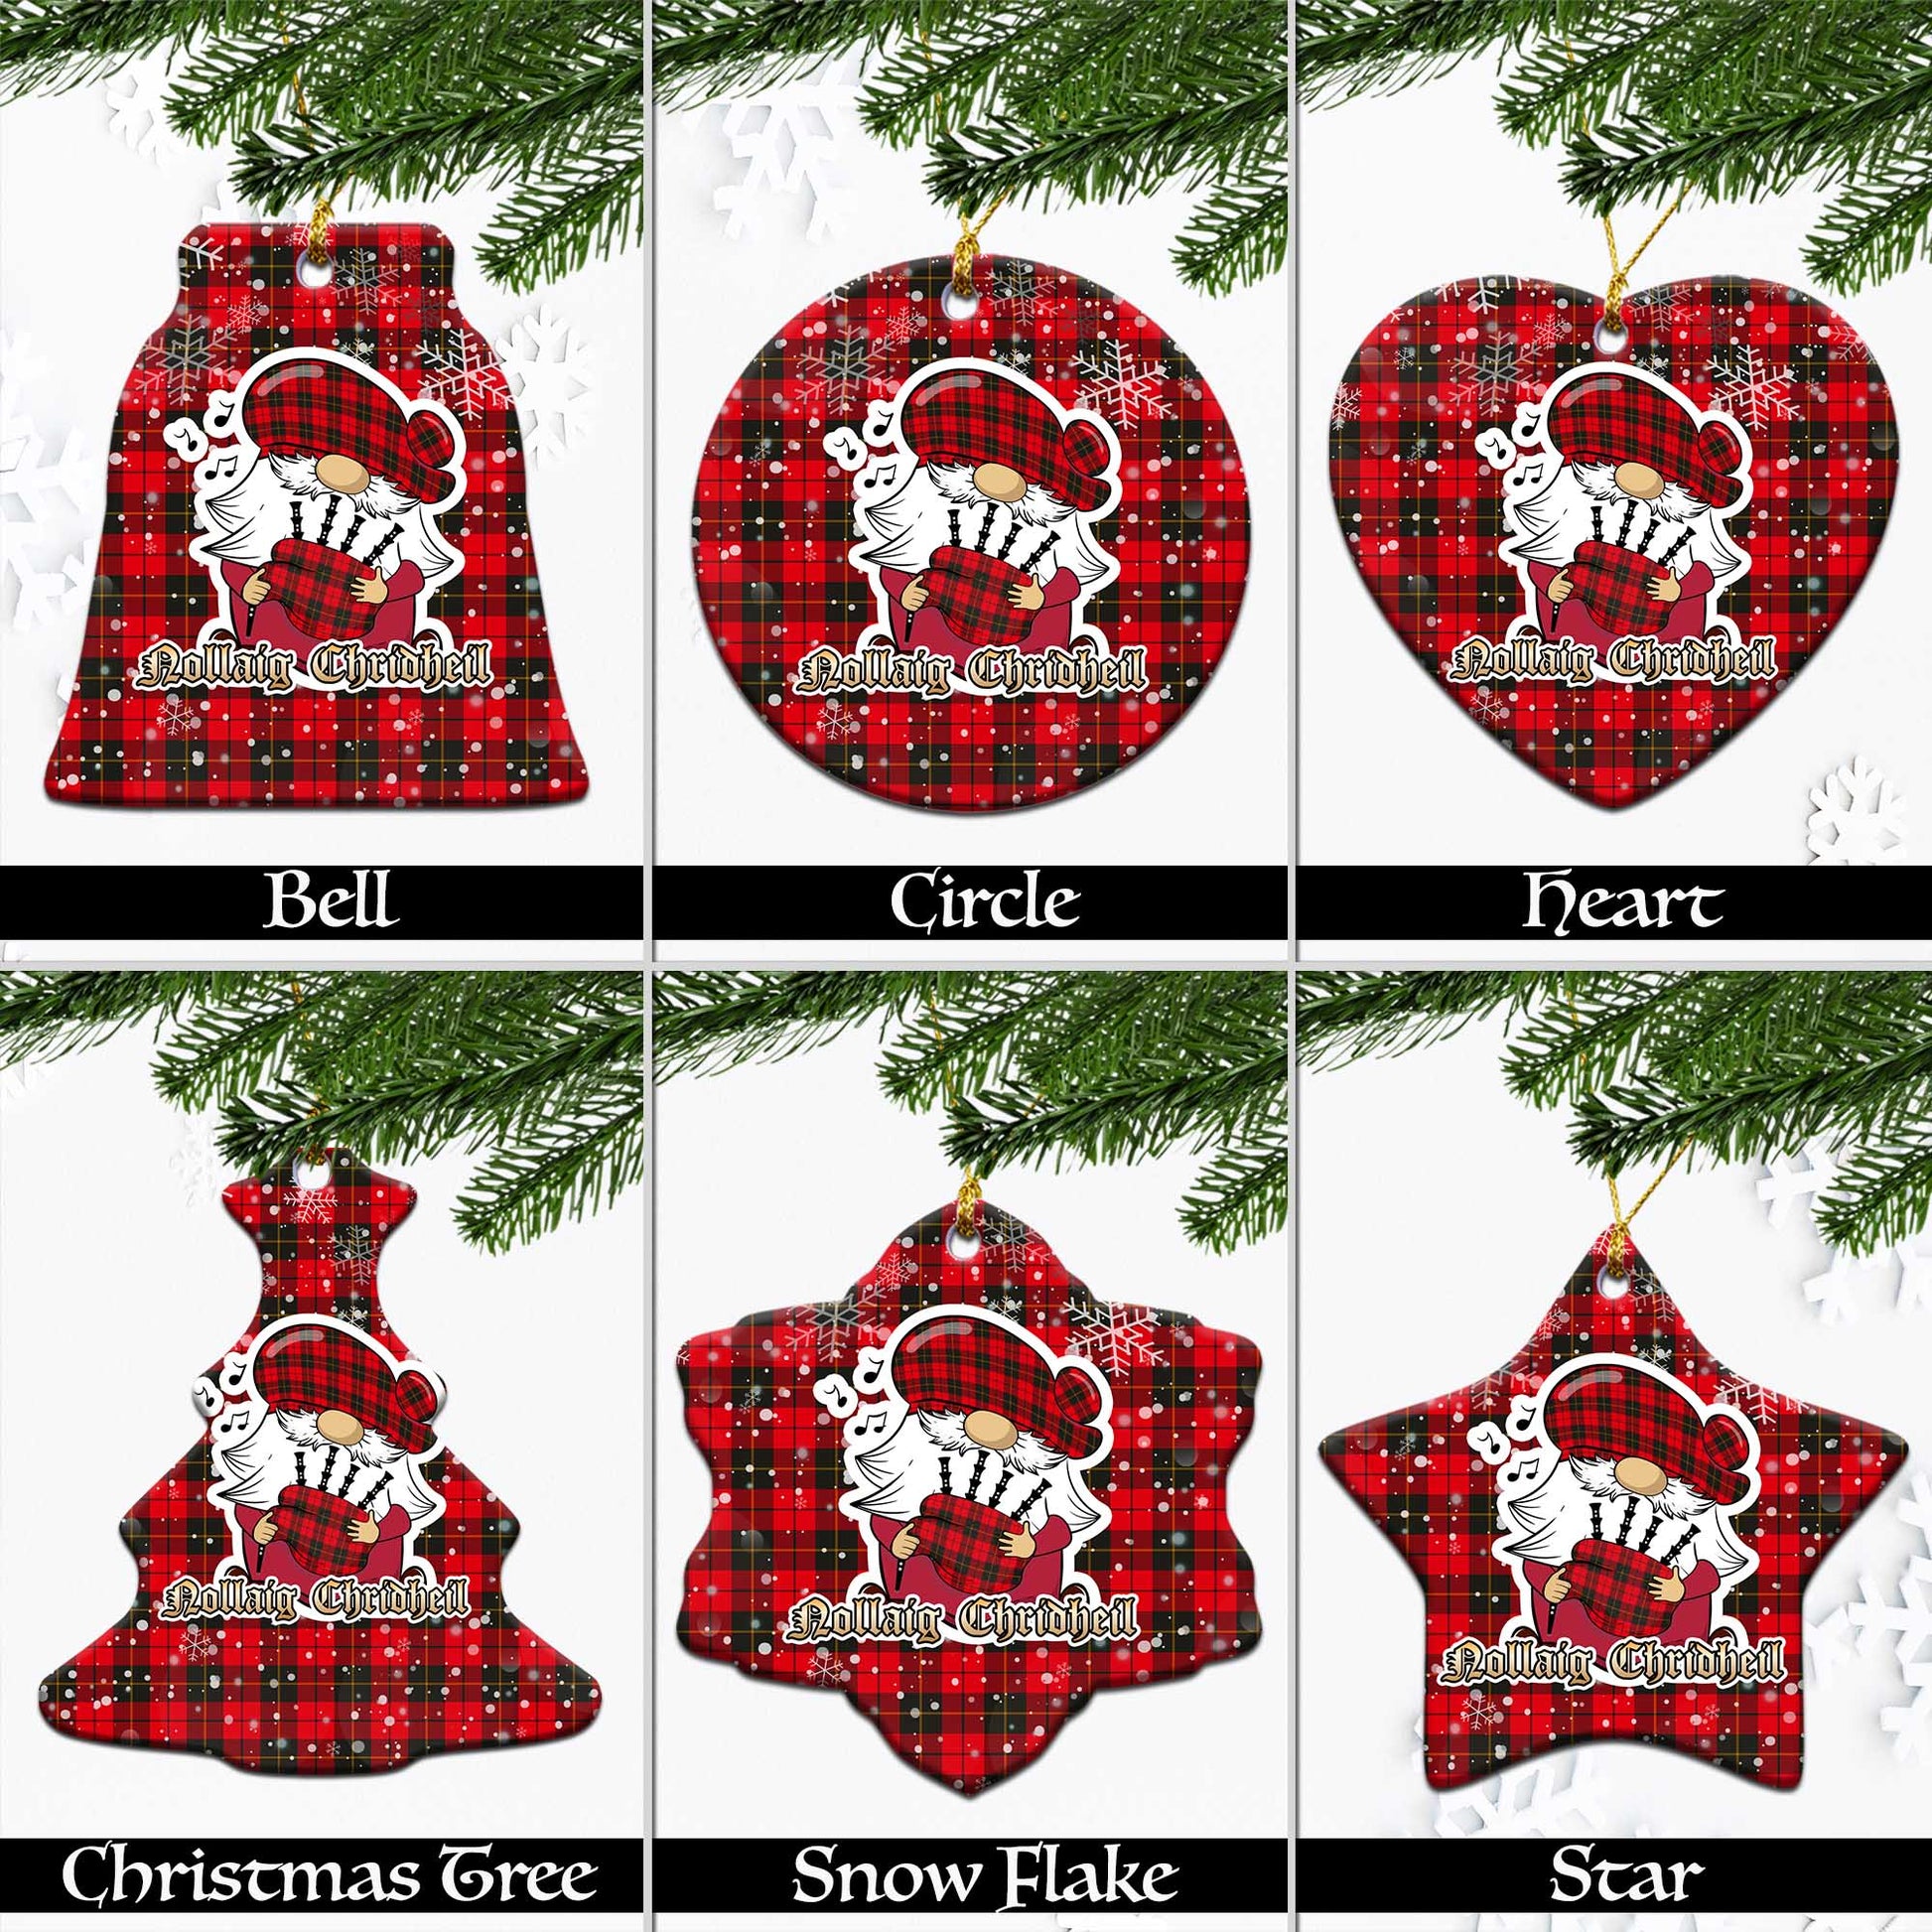 wallace-weathered-tartan-christmas-ornaments-with-scottish-gnome-playing-bagpipes